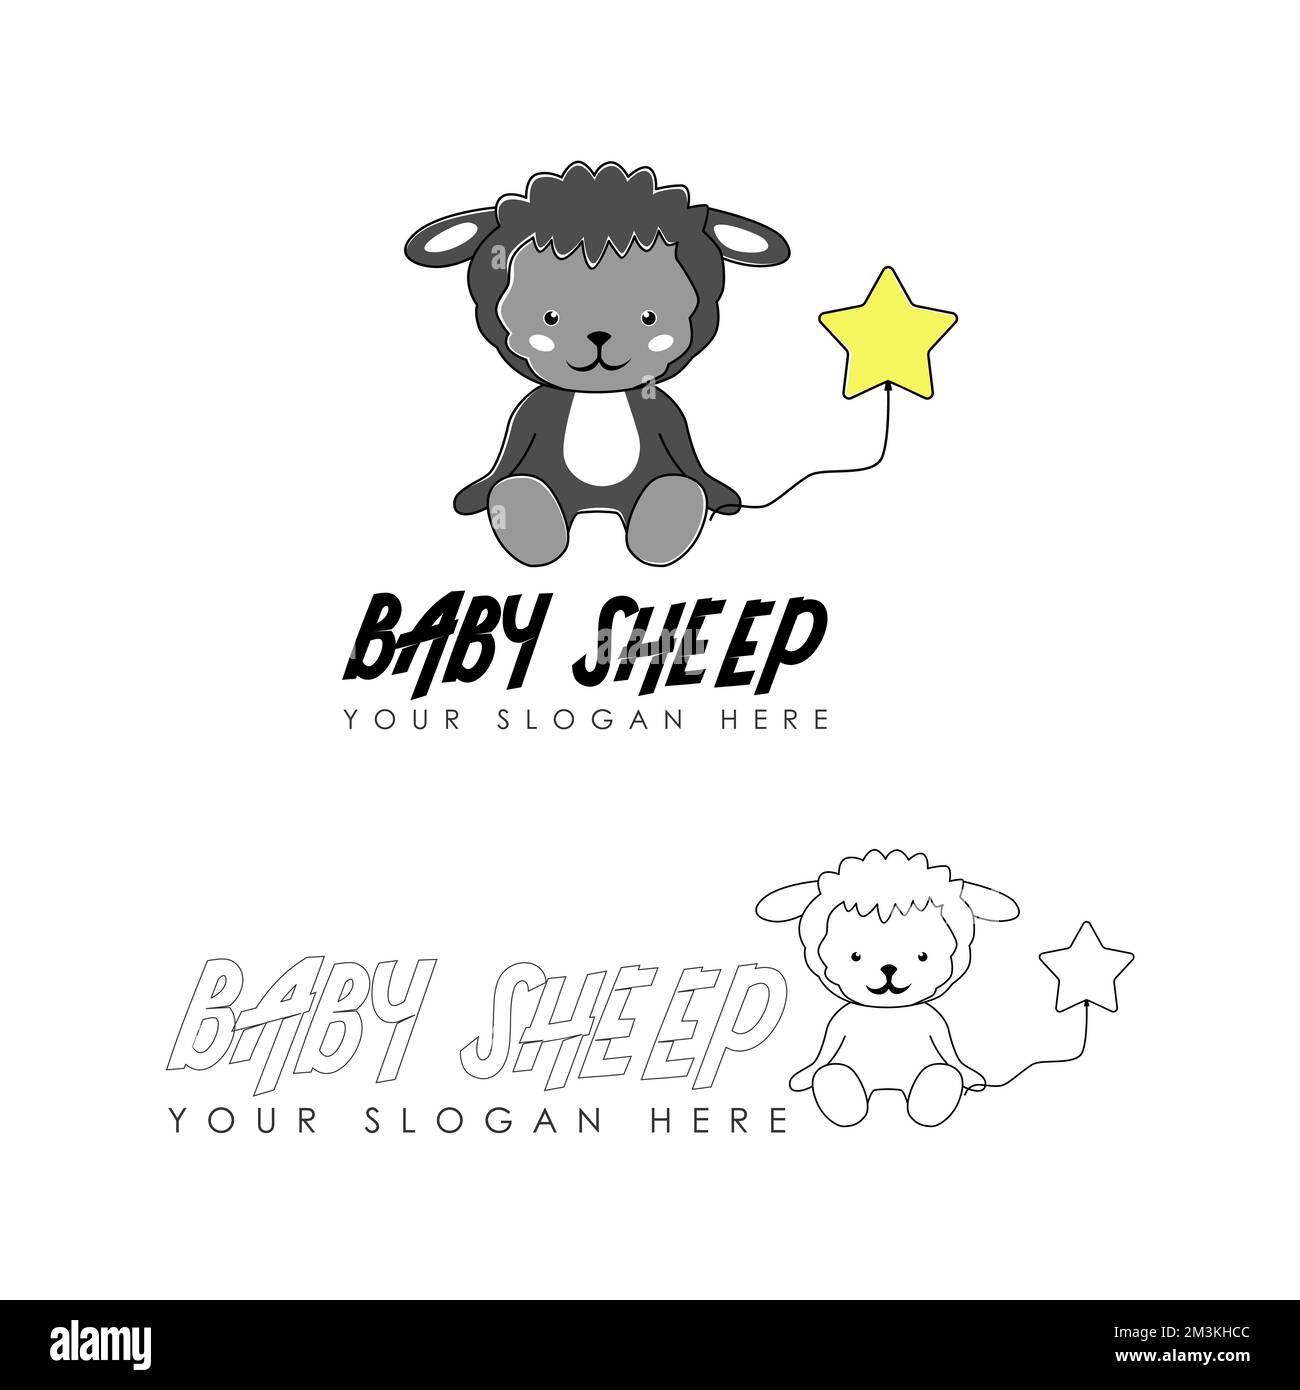 Little black sheep who was moody and holding a toy image graphic icon logo design abstract concept vector stock. related animal or cartoon or children Stock Vector